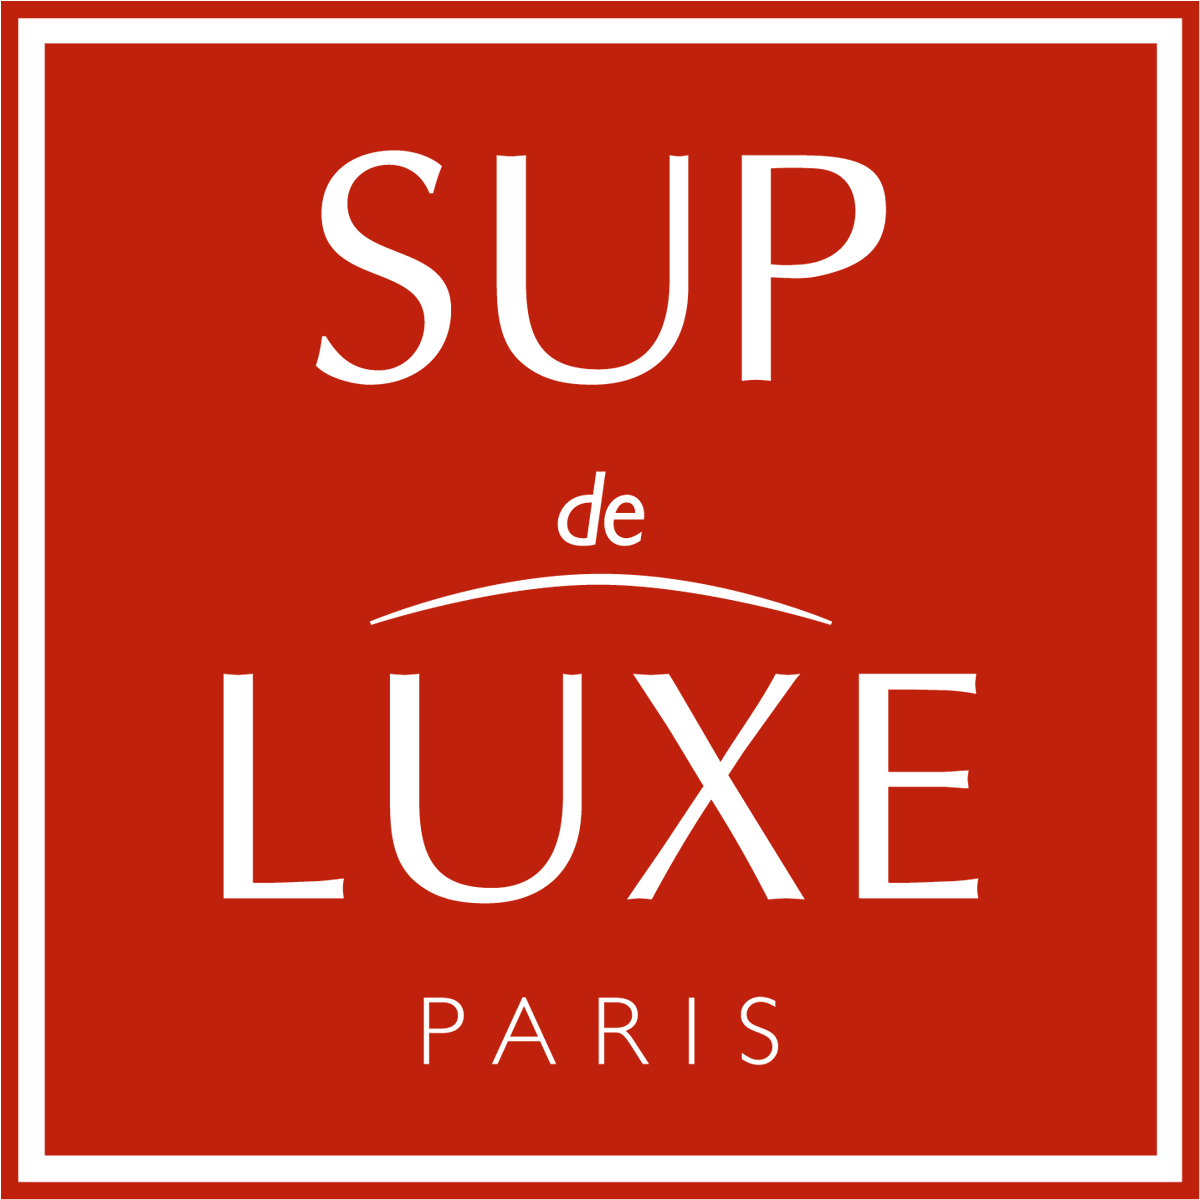 ⭐DRESSX + SUP de LUXE Luxury fashion program⭐ Advance your career with our certification |DRESSX + SUP de LUX| program, developed in collaboration with the prestigious @SupdeLuxe - School of Luxury Business. Whether you’re an experienced professional or a student eager to…